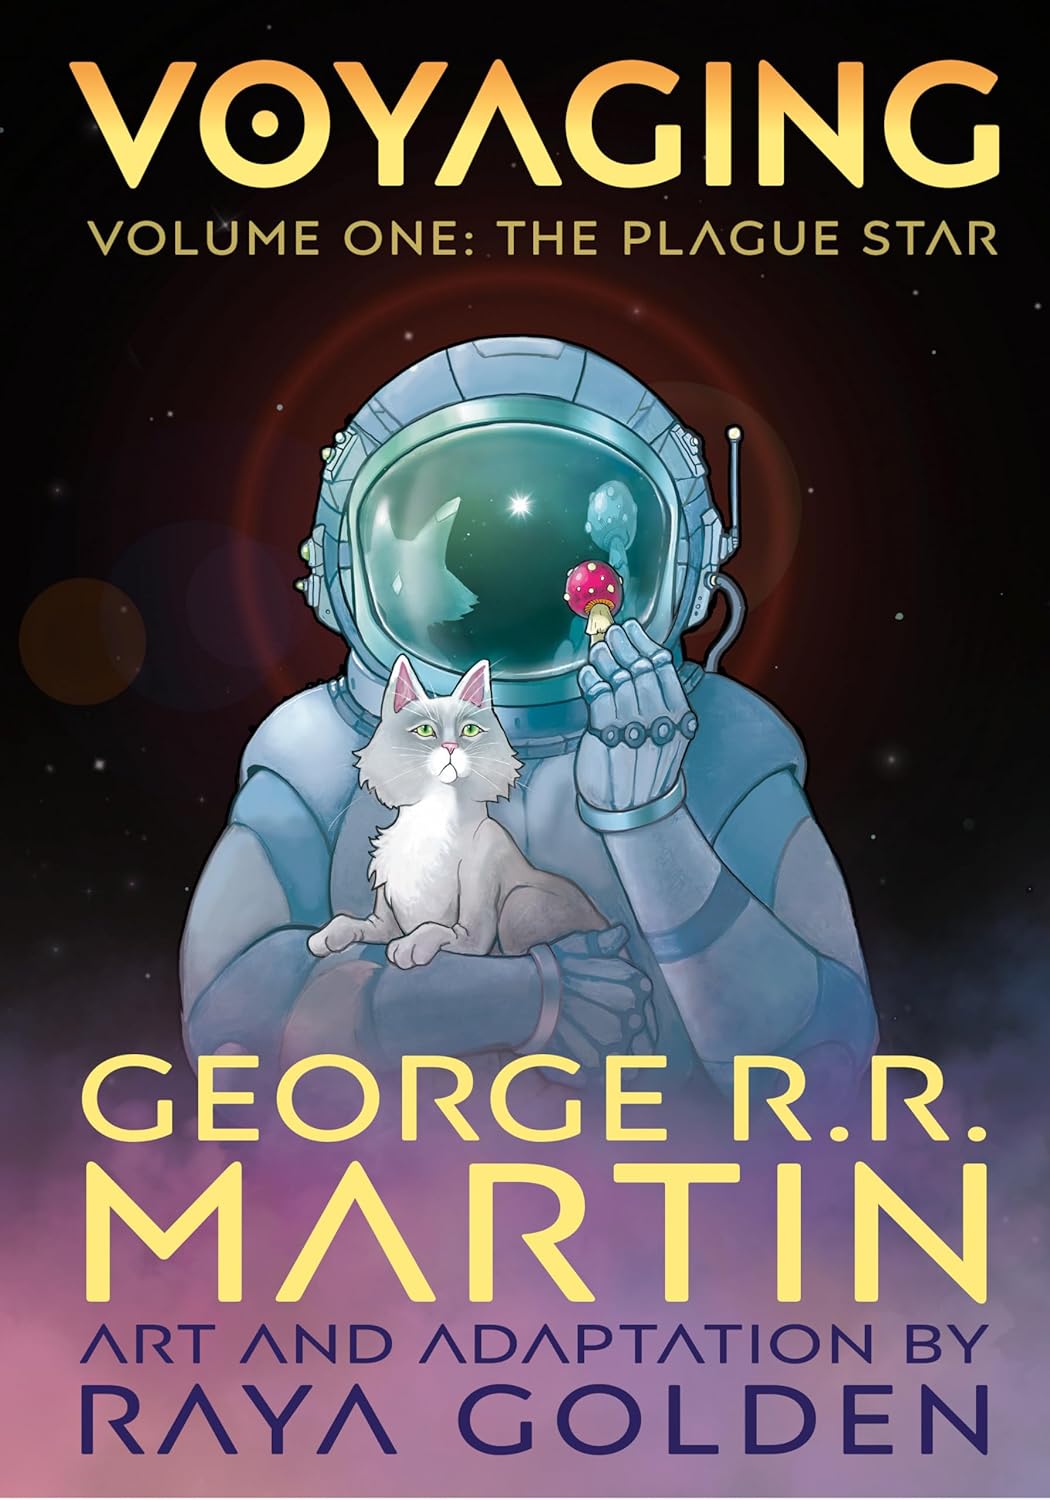 Voyaging, Volume One: The Plague Star by George R. R. Martin